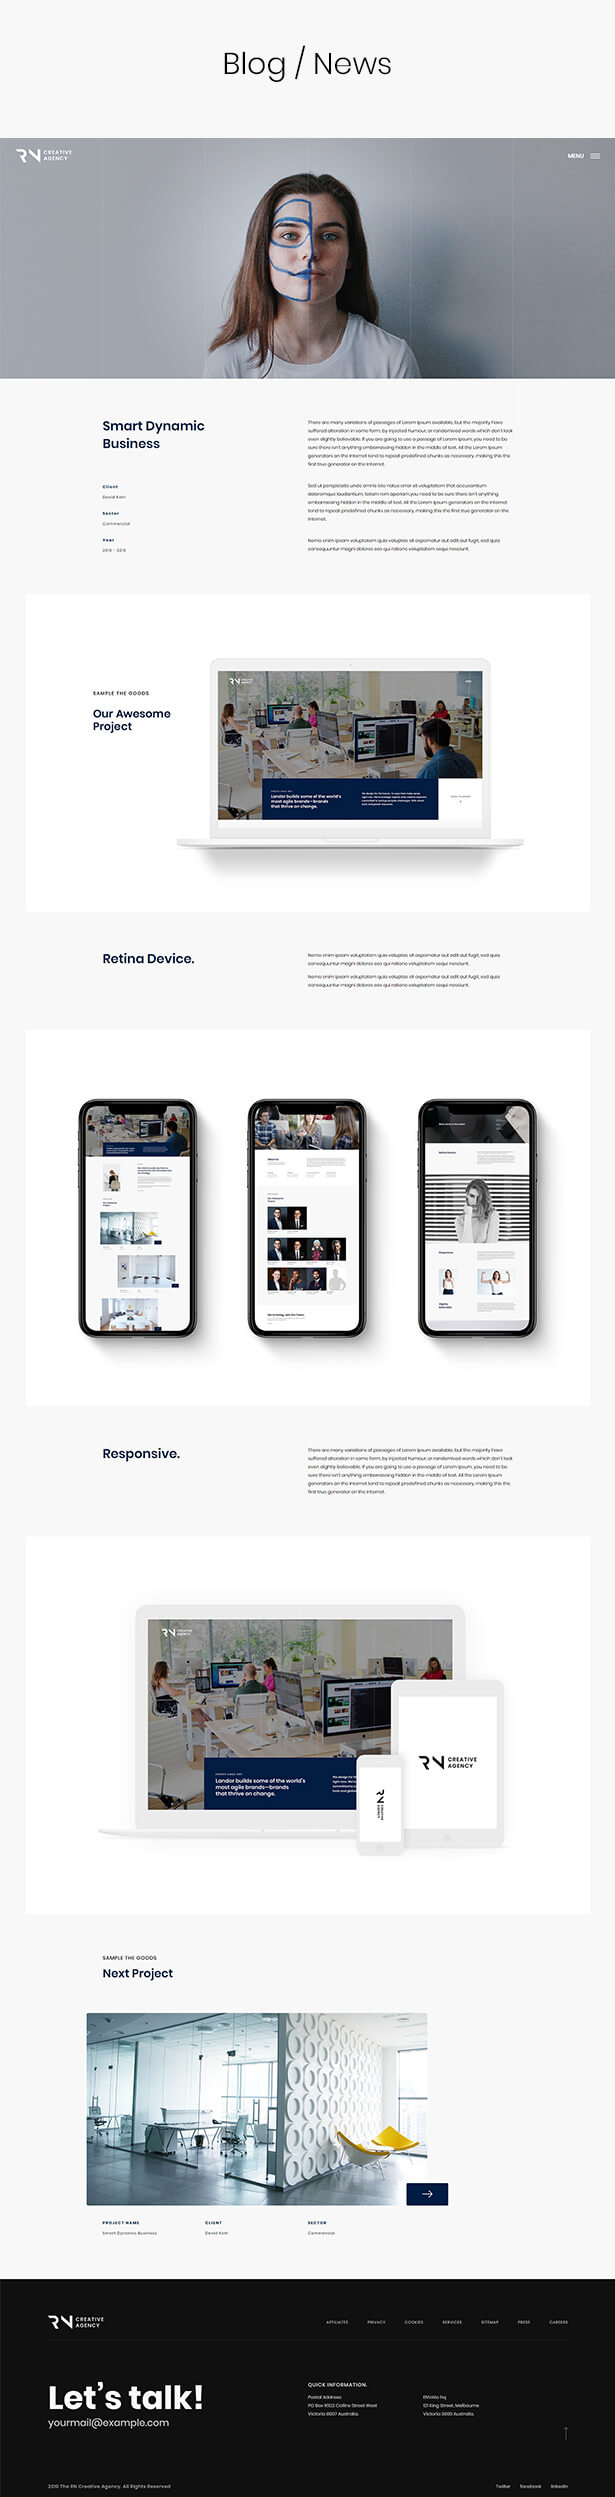 TheRN - React Gatsby Creative Agency & Blog Template - 7